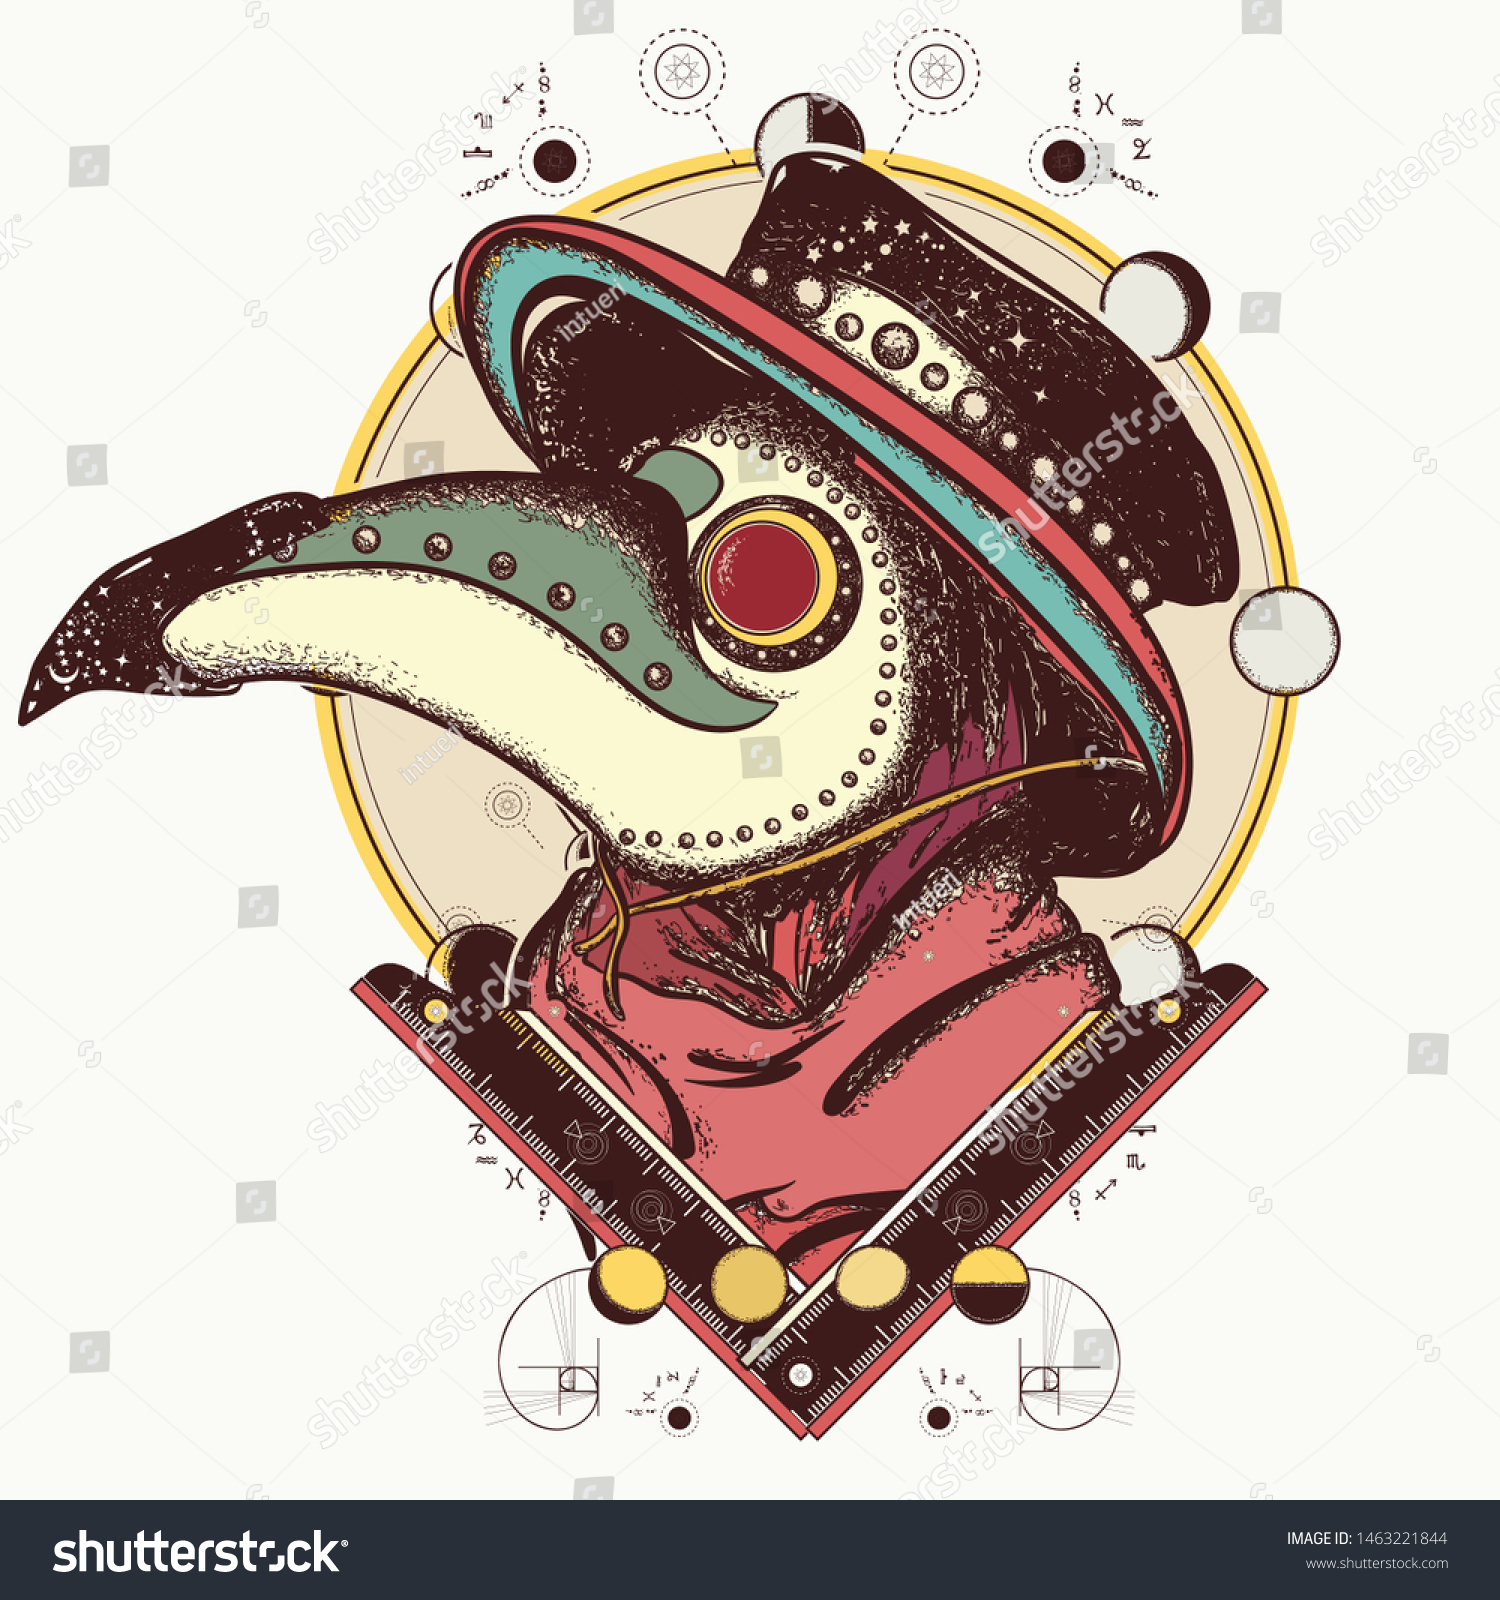 SVG of Plague doctor portrait. Color vector tattoo. Medieval gothic venetian mask and masonic symbols  svg